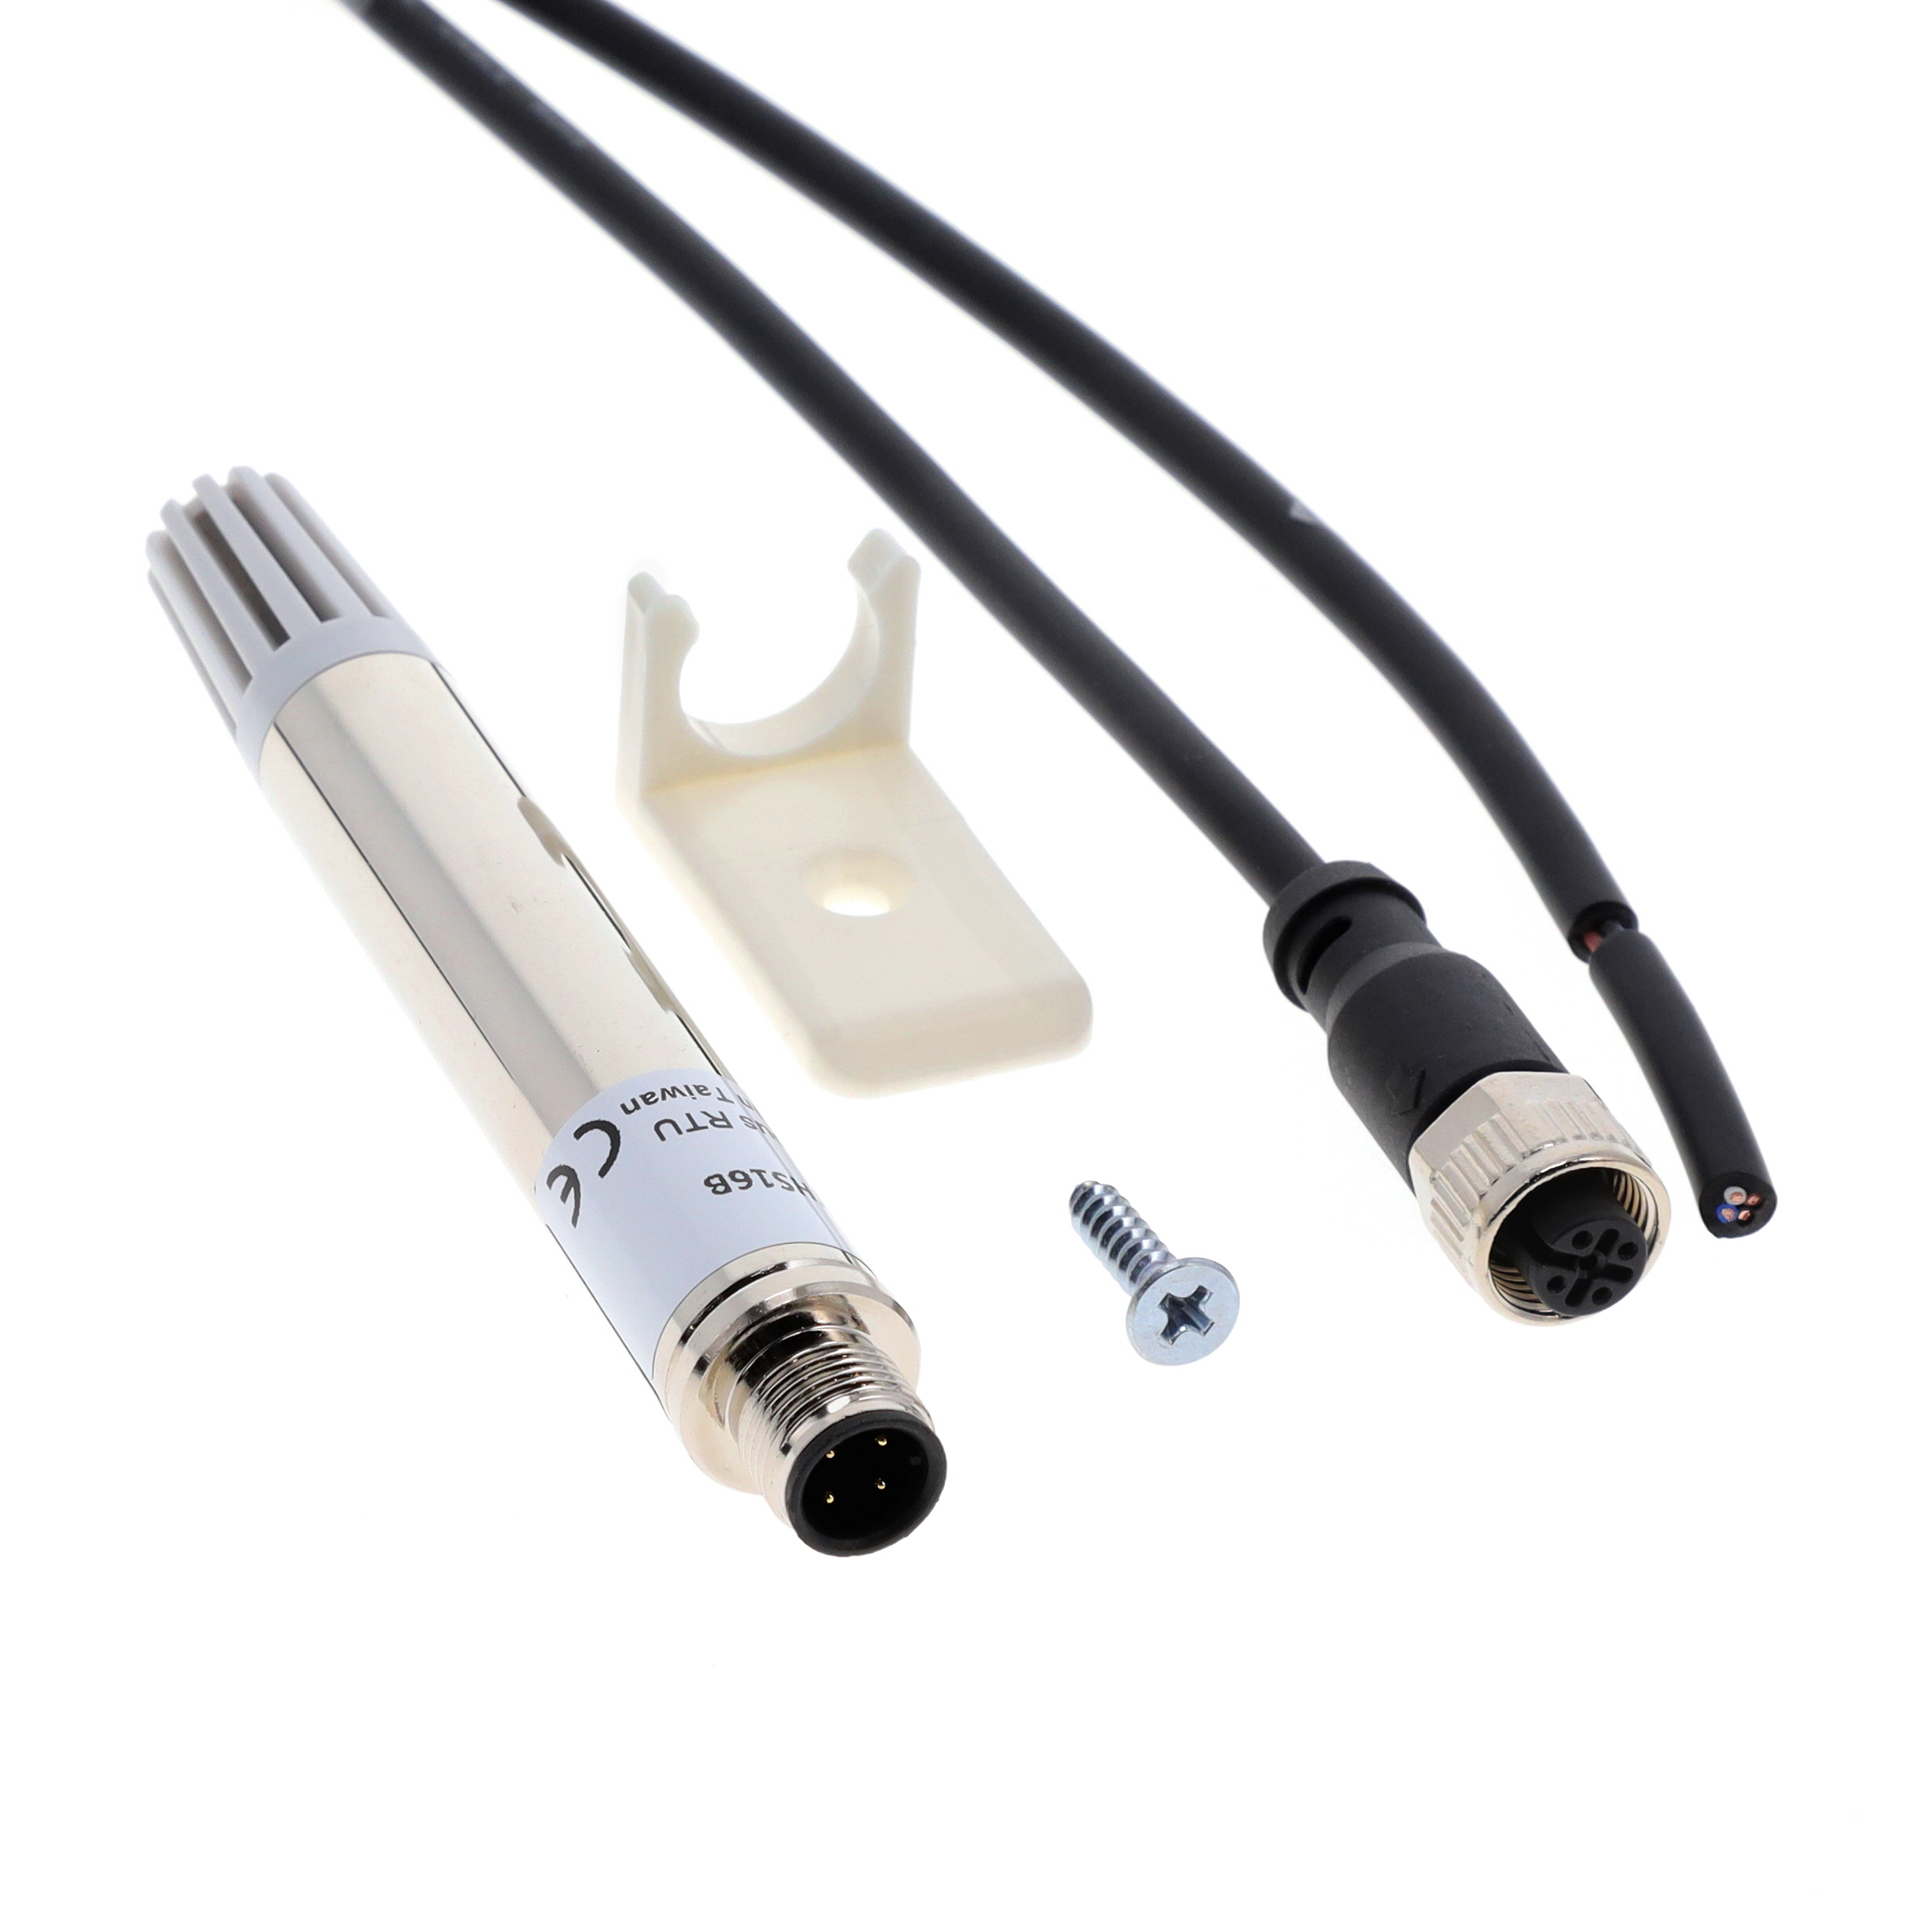 【96PD-THS16B】TEMPERATURE/HUMIDITY SENSOR WITH